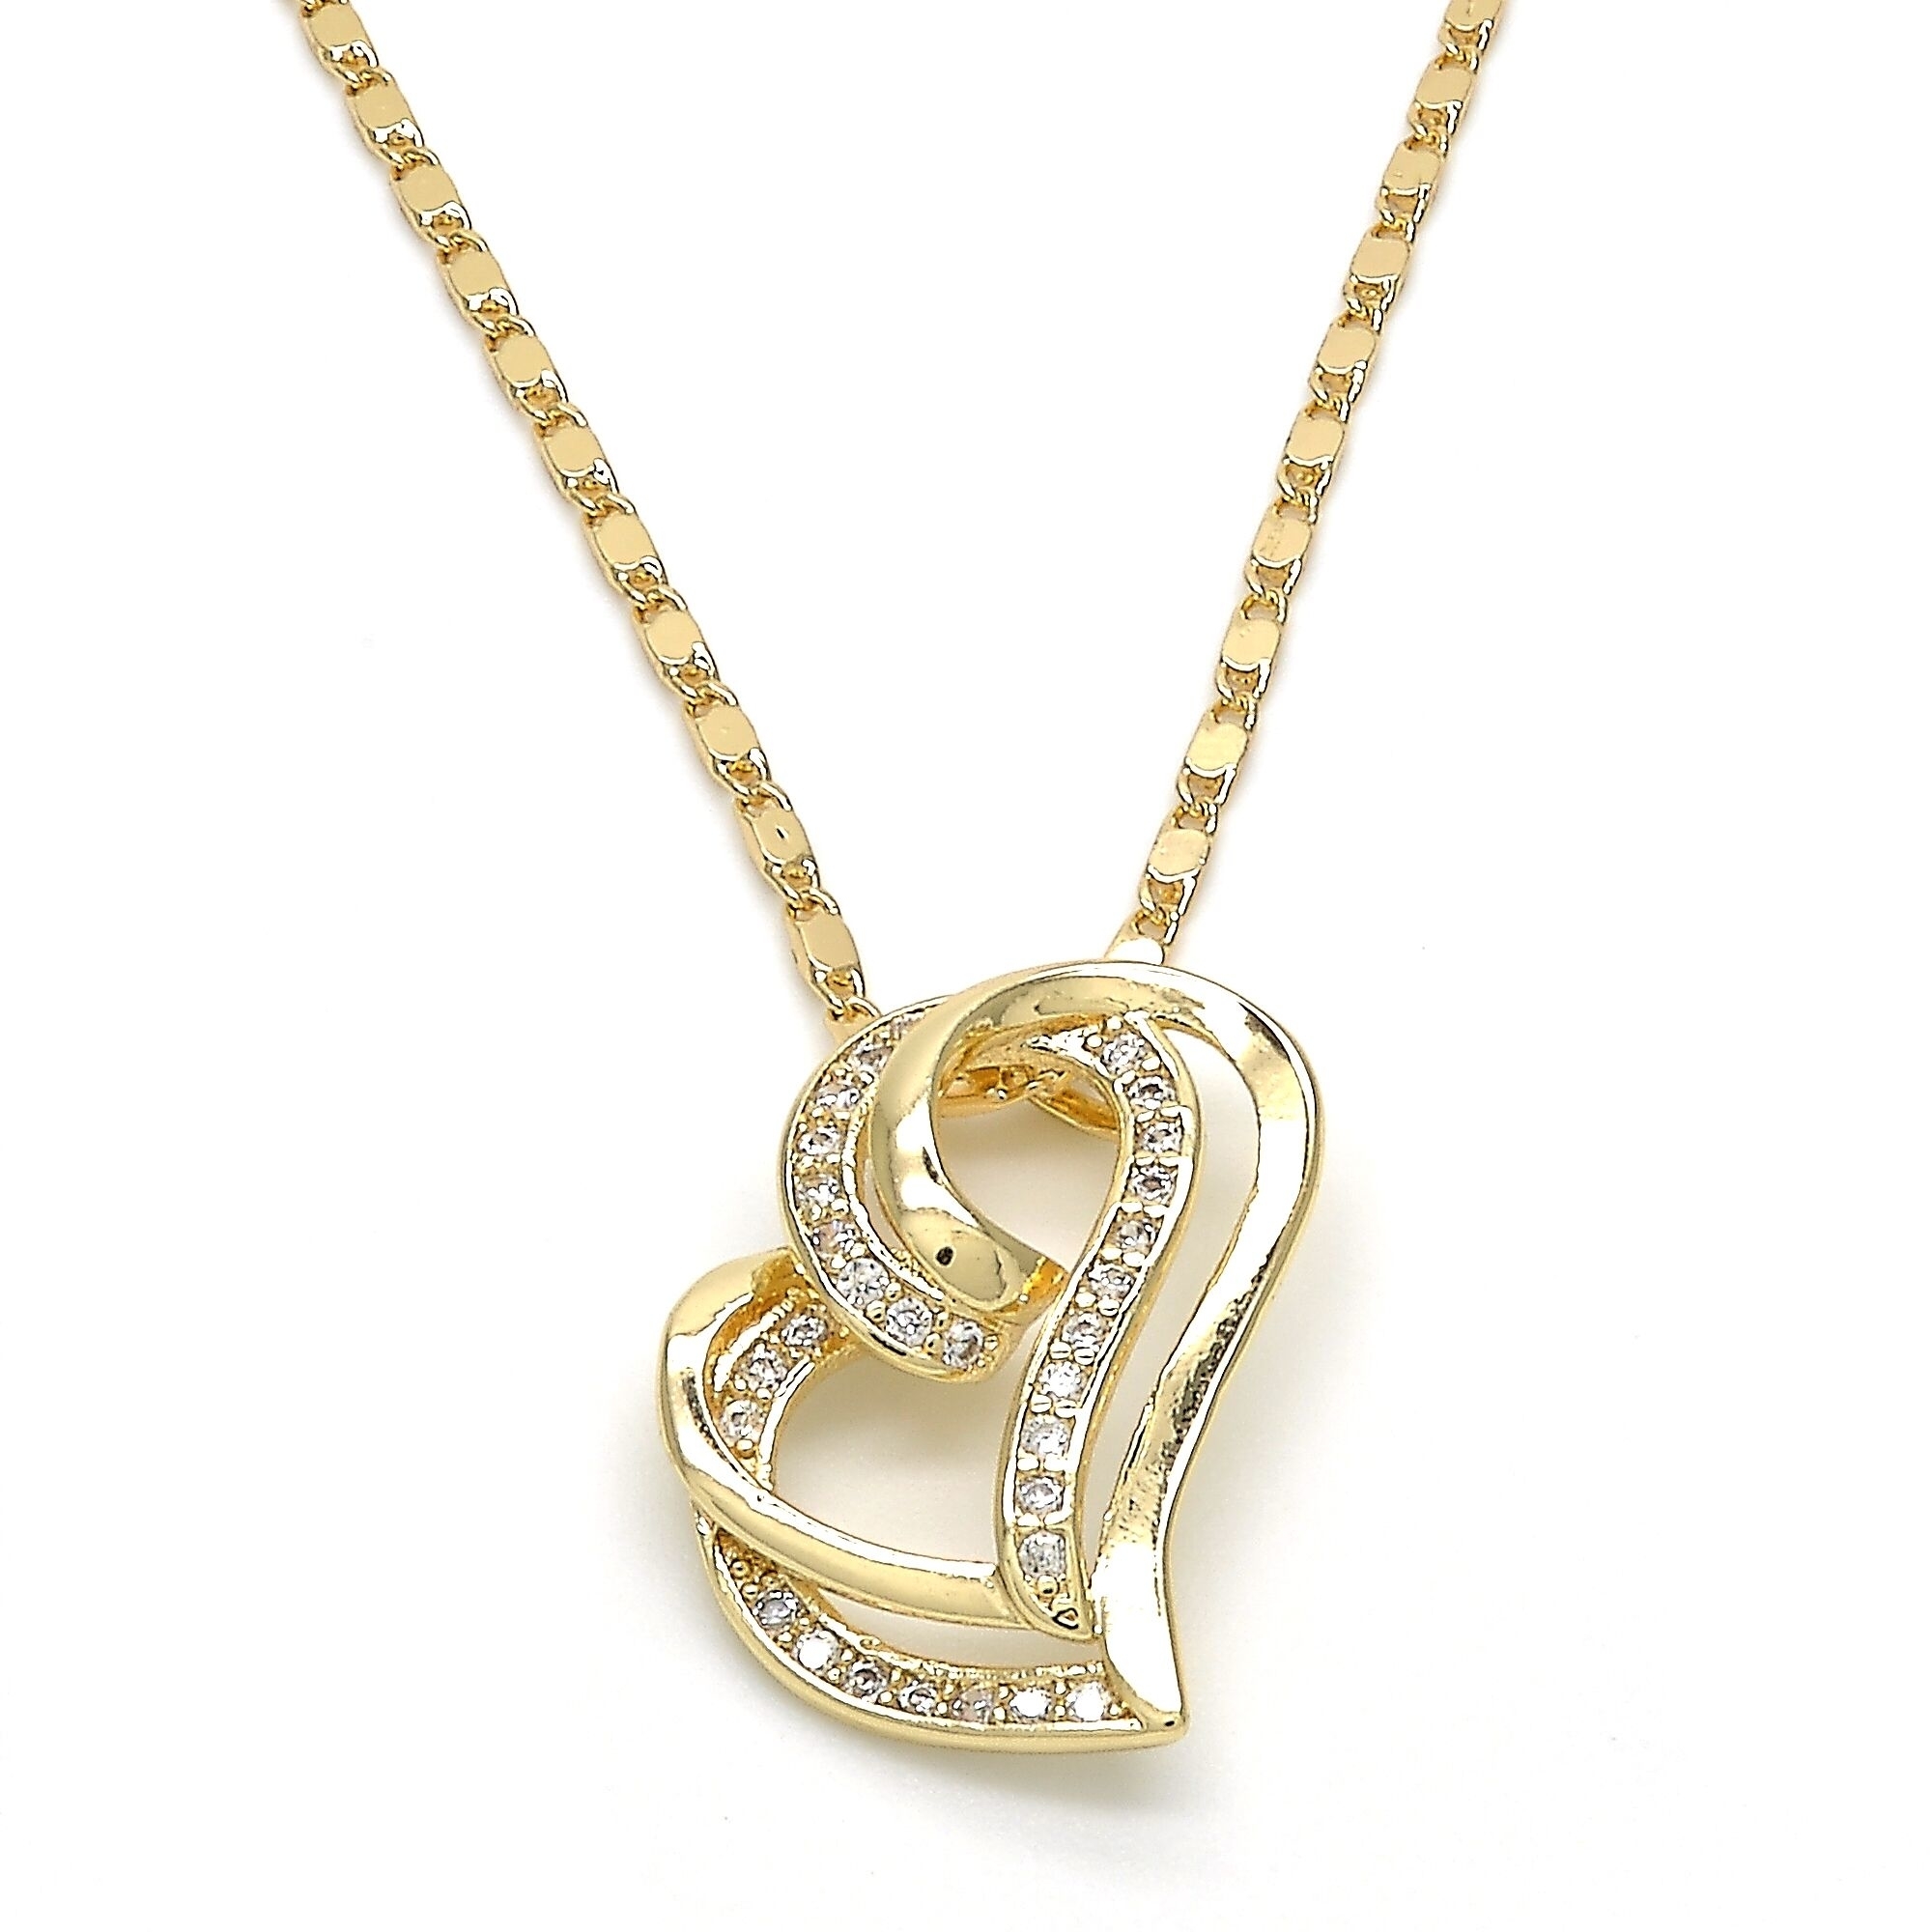 18k Gold Filled High Polish Finsh Elegant HEART Necklace with Diamond Accent